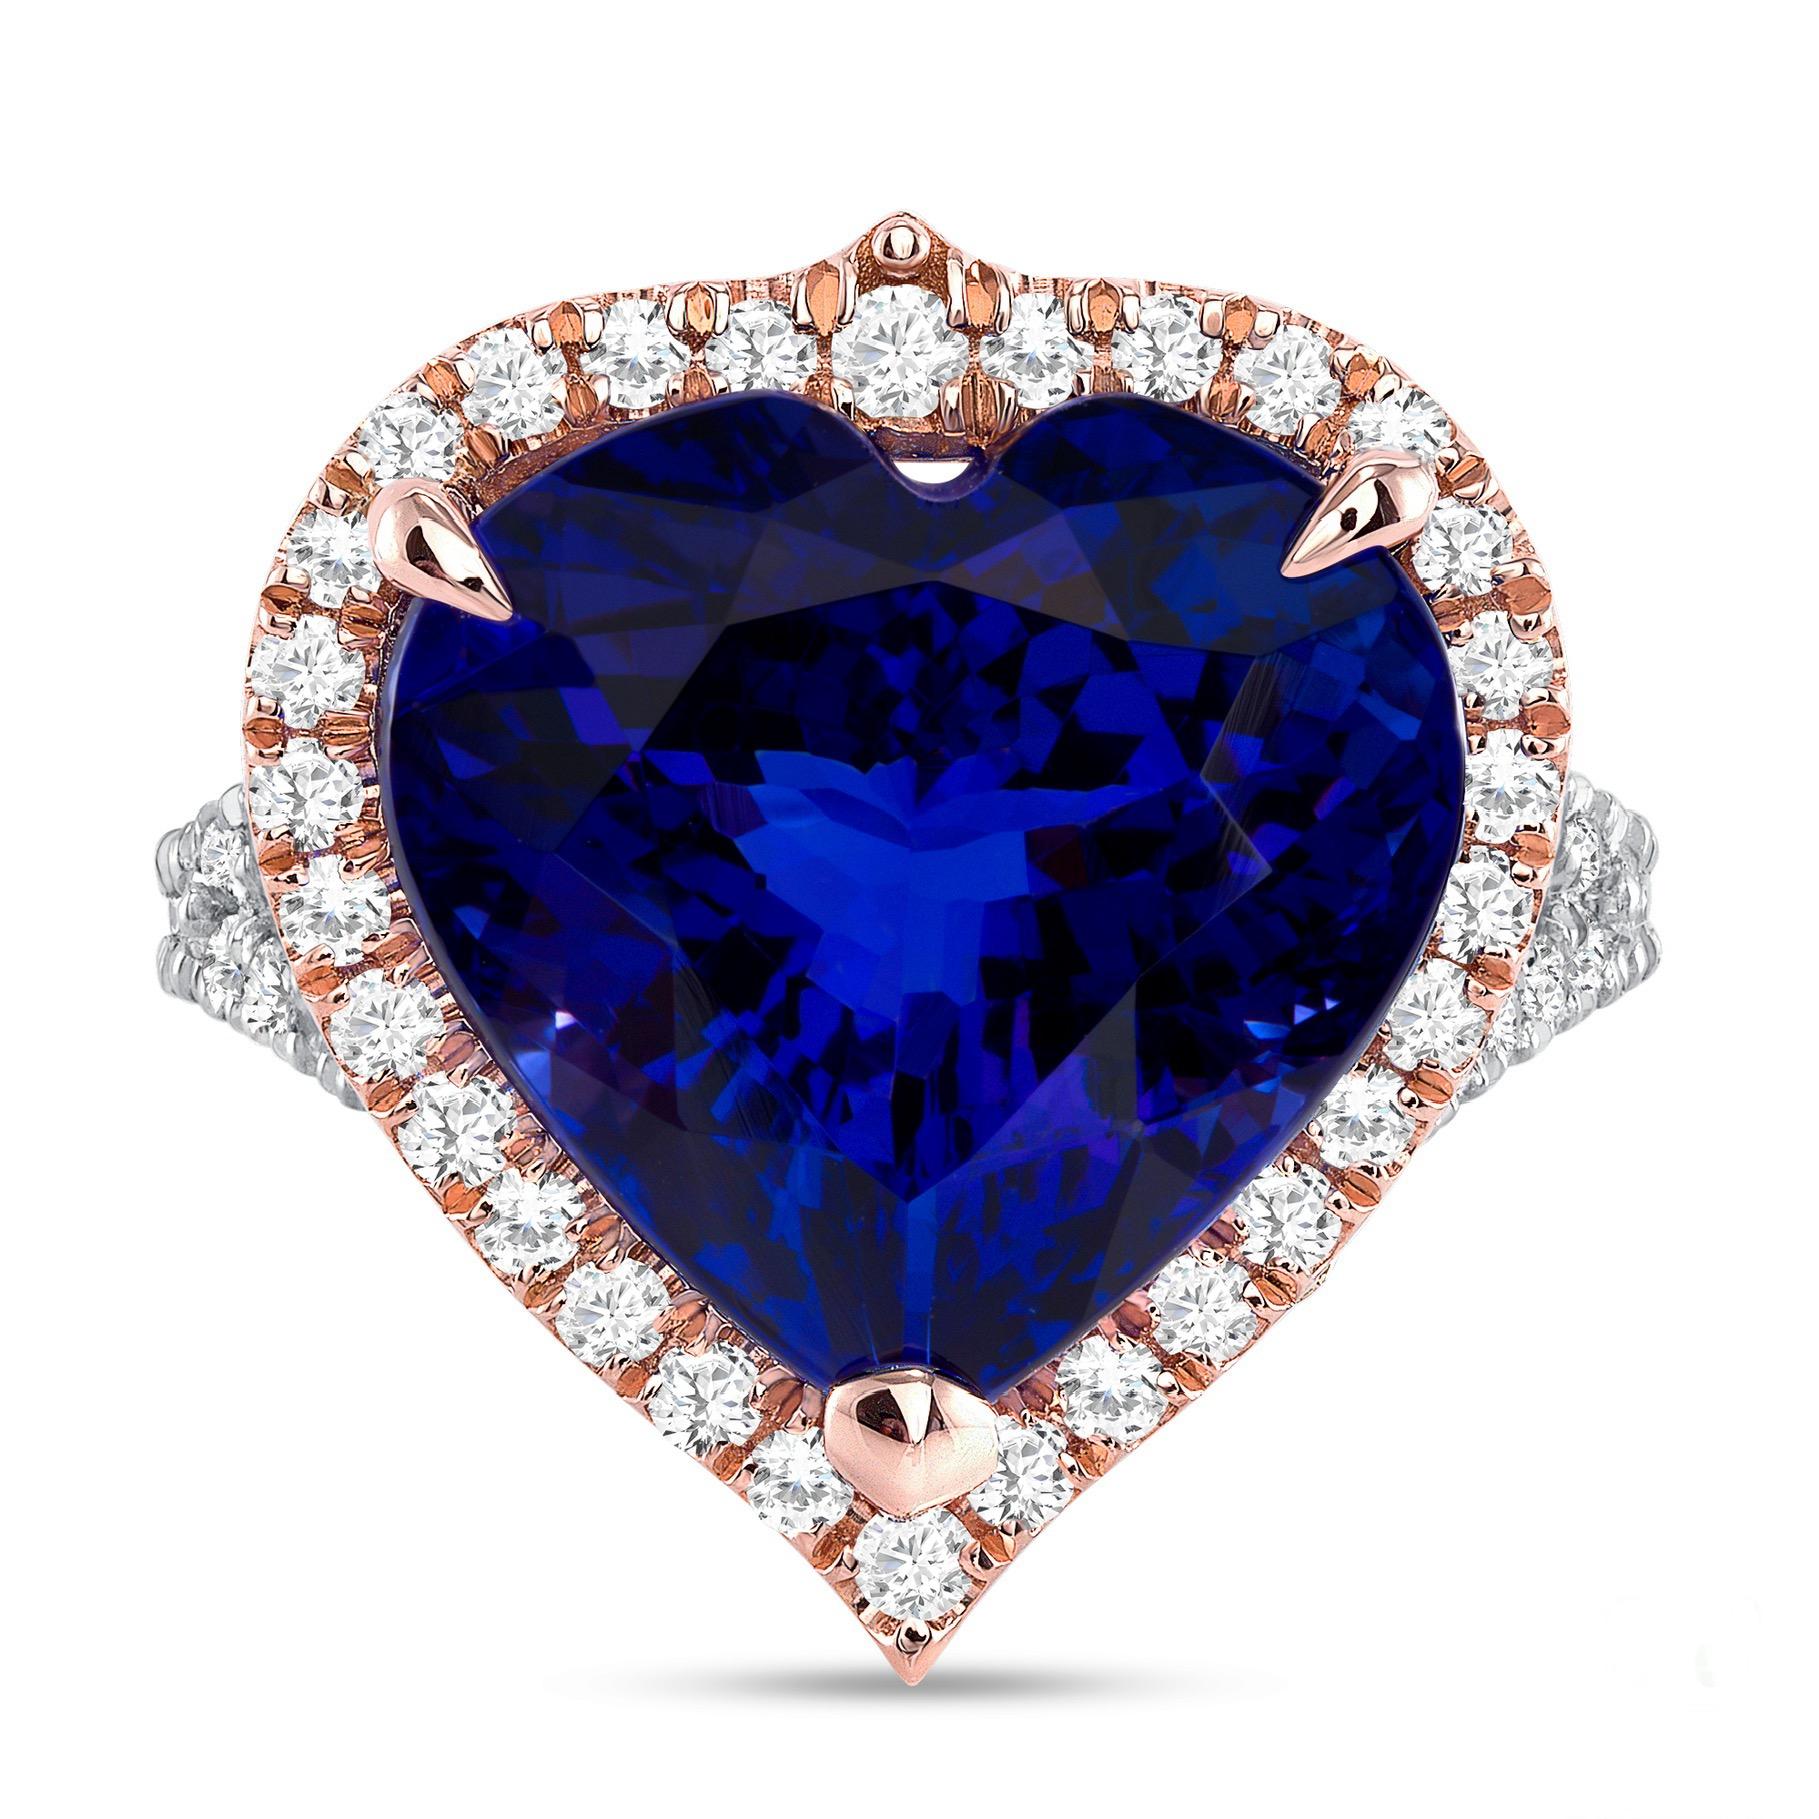 18K white with rose gold ring, featuring a 7.31-carat, heart-shaped Tanzanite, accented by 66 round diamonds totaling 0.76 carats. GIA certified.